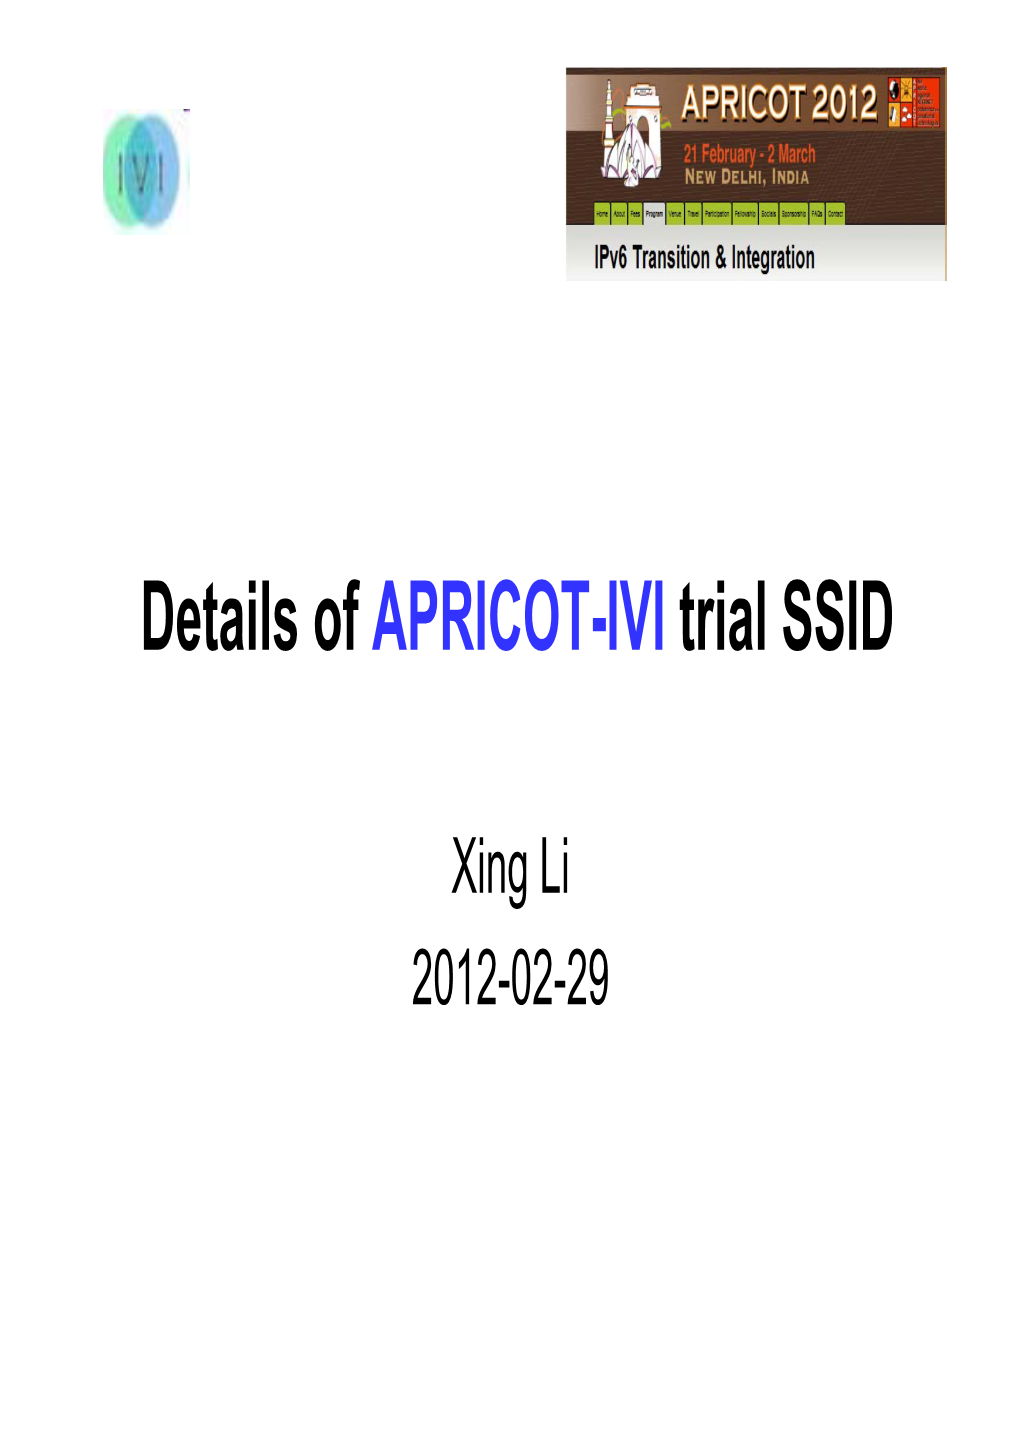 Details of APRICOT-IVI Trial SSID